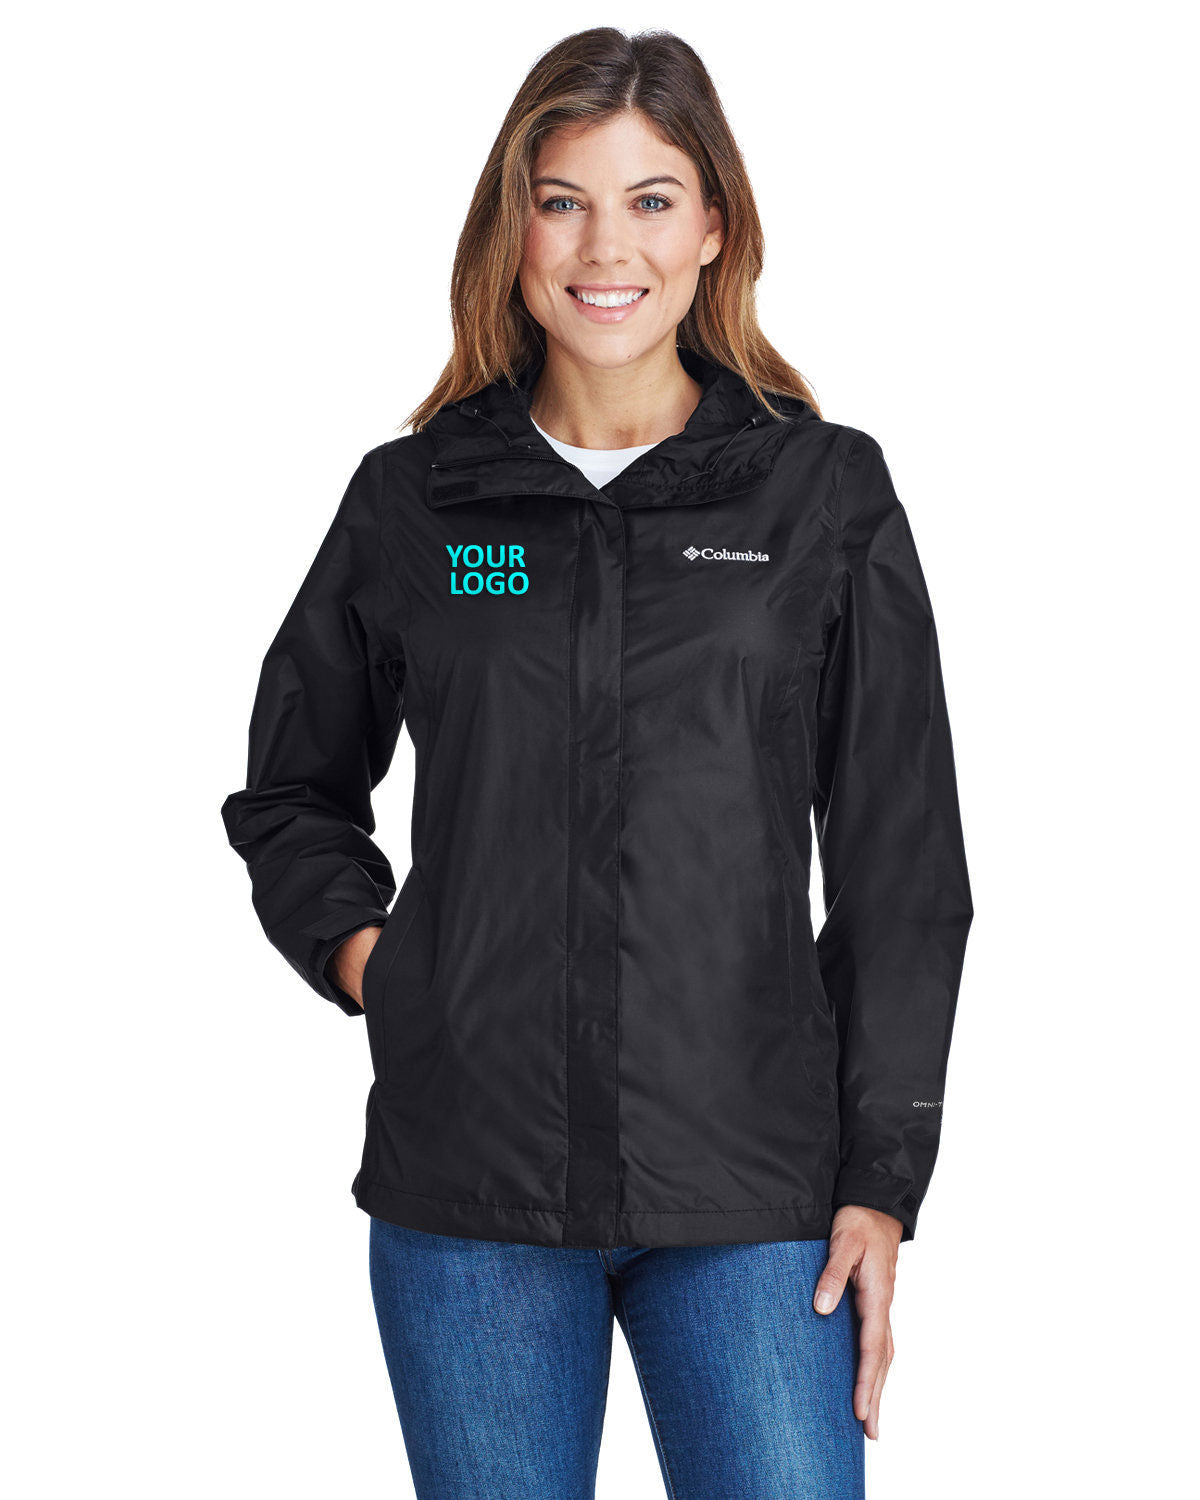 Columbia Black 2436 embroidered jackets for business